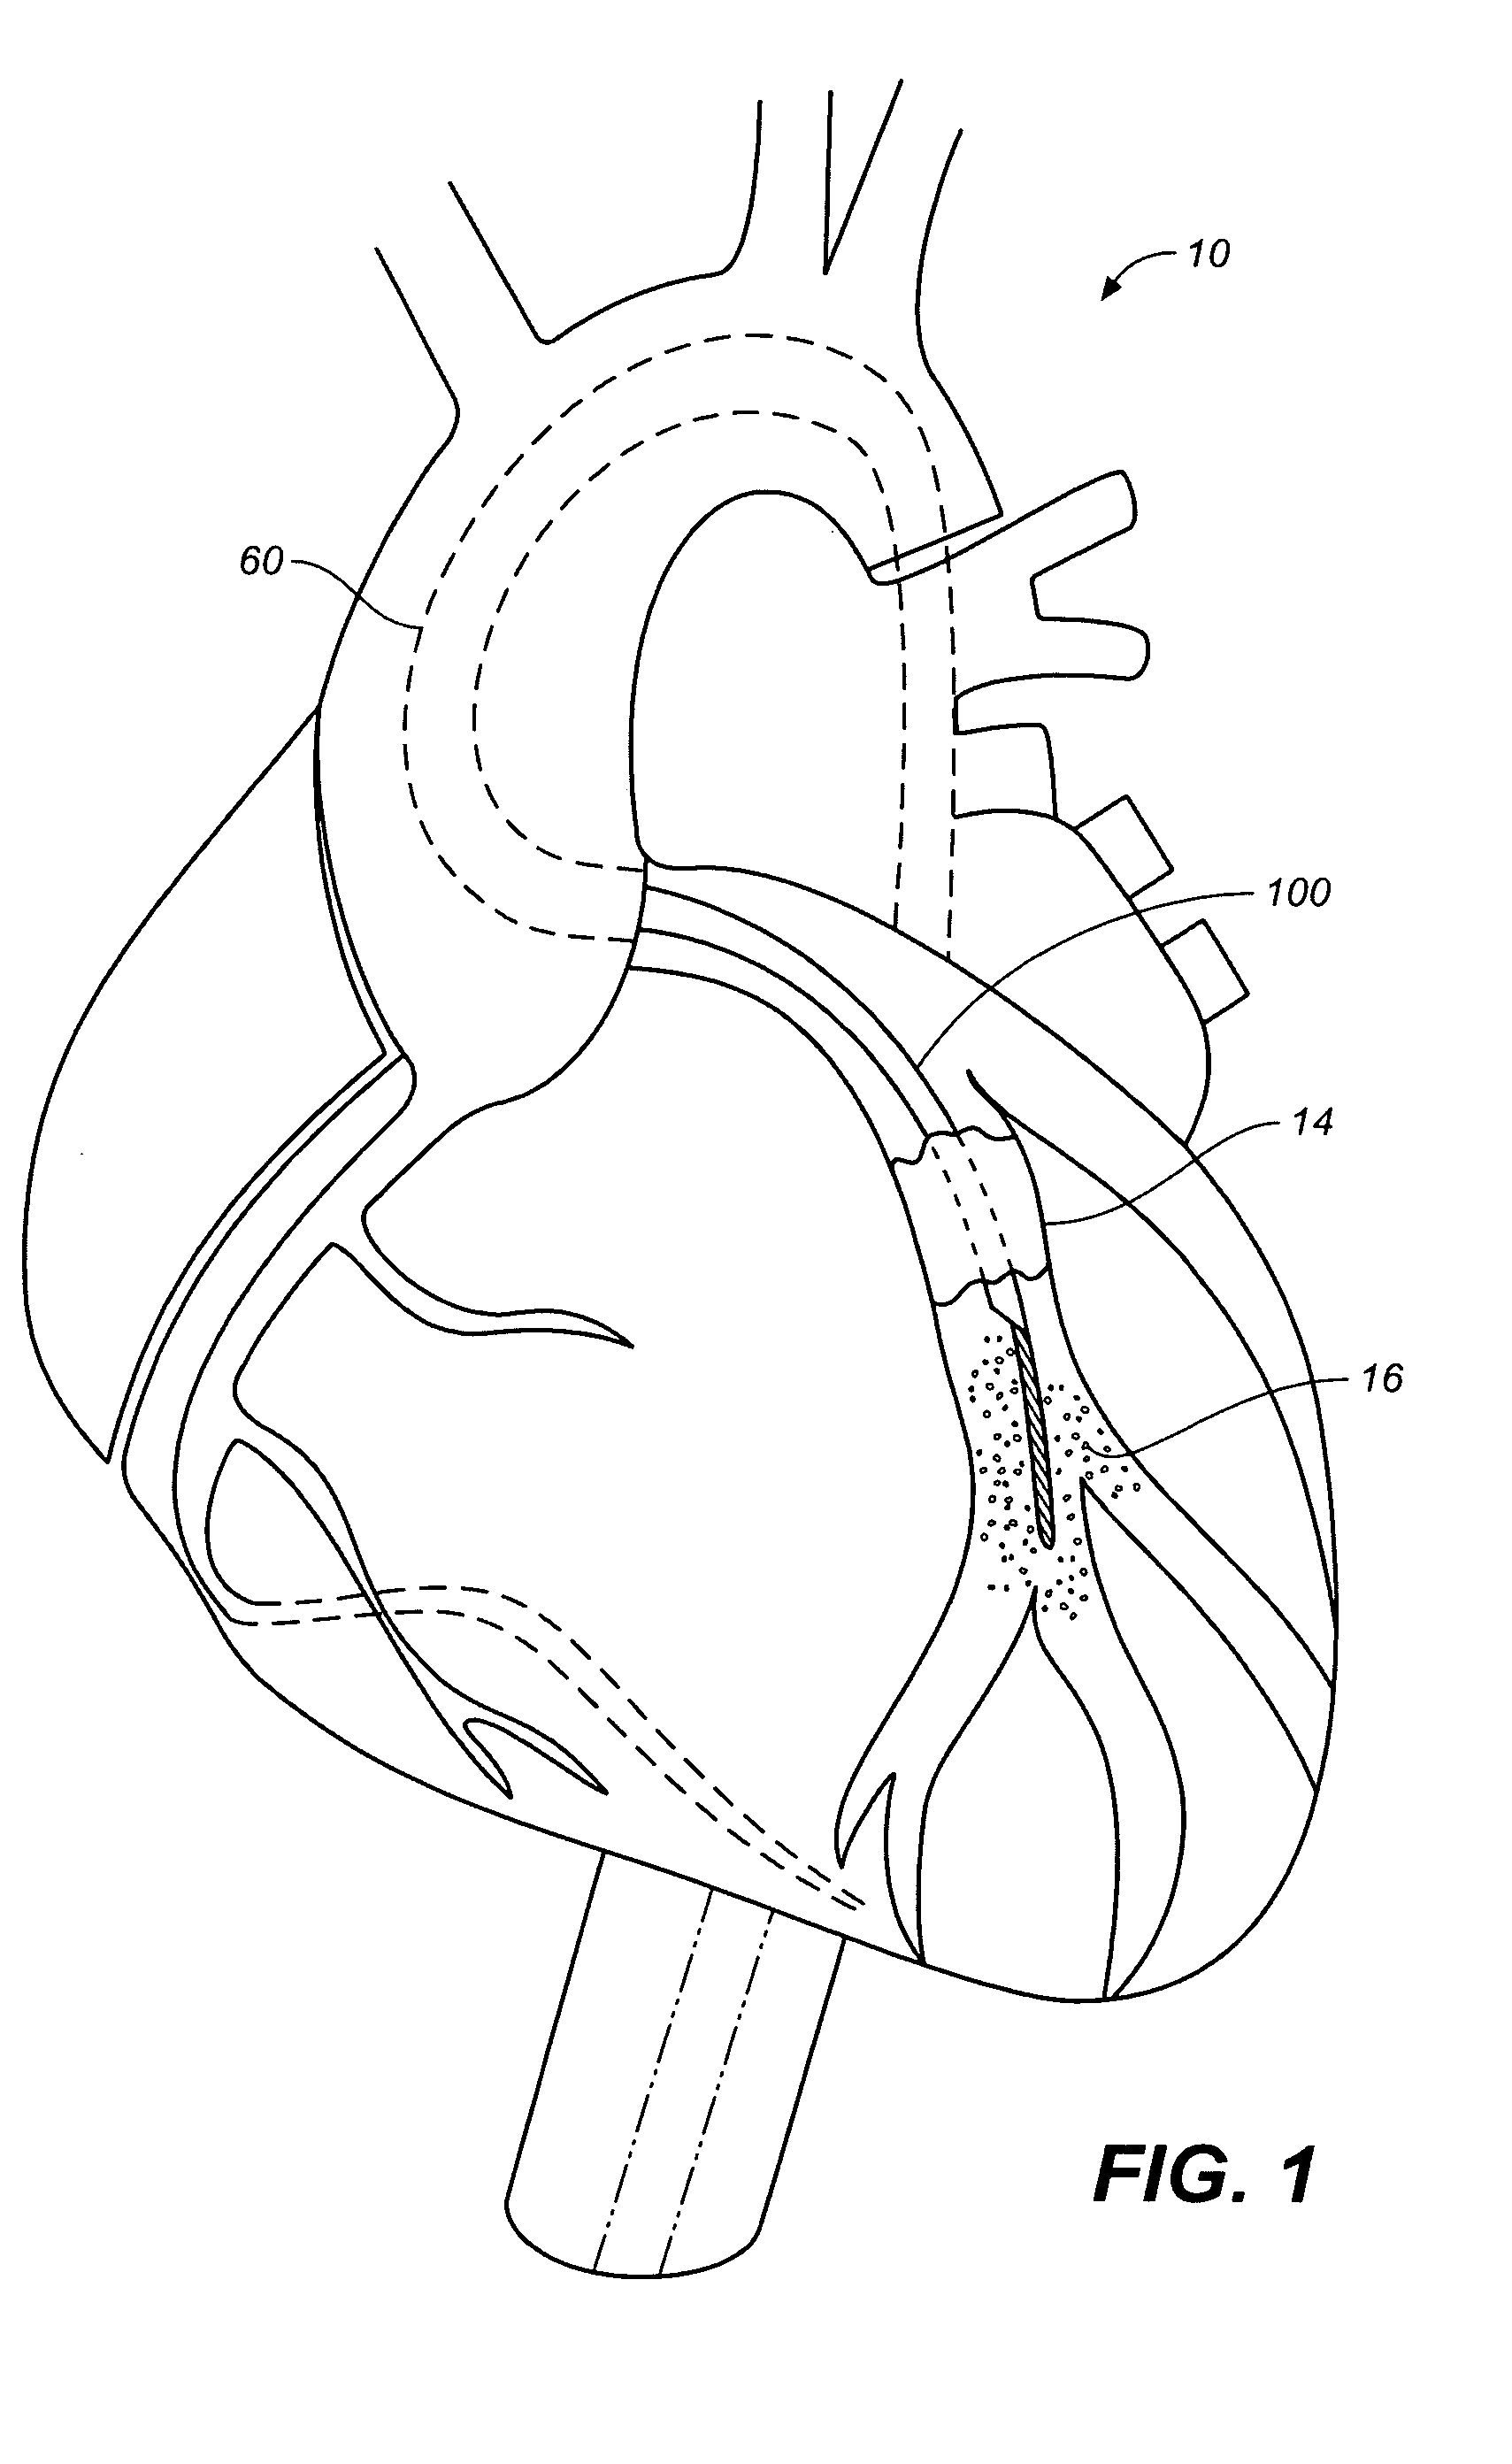 Integrated device for ischemic treatment